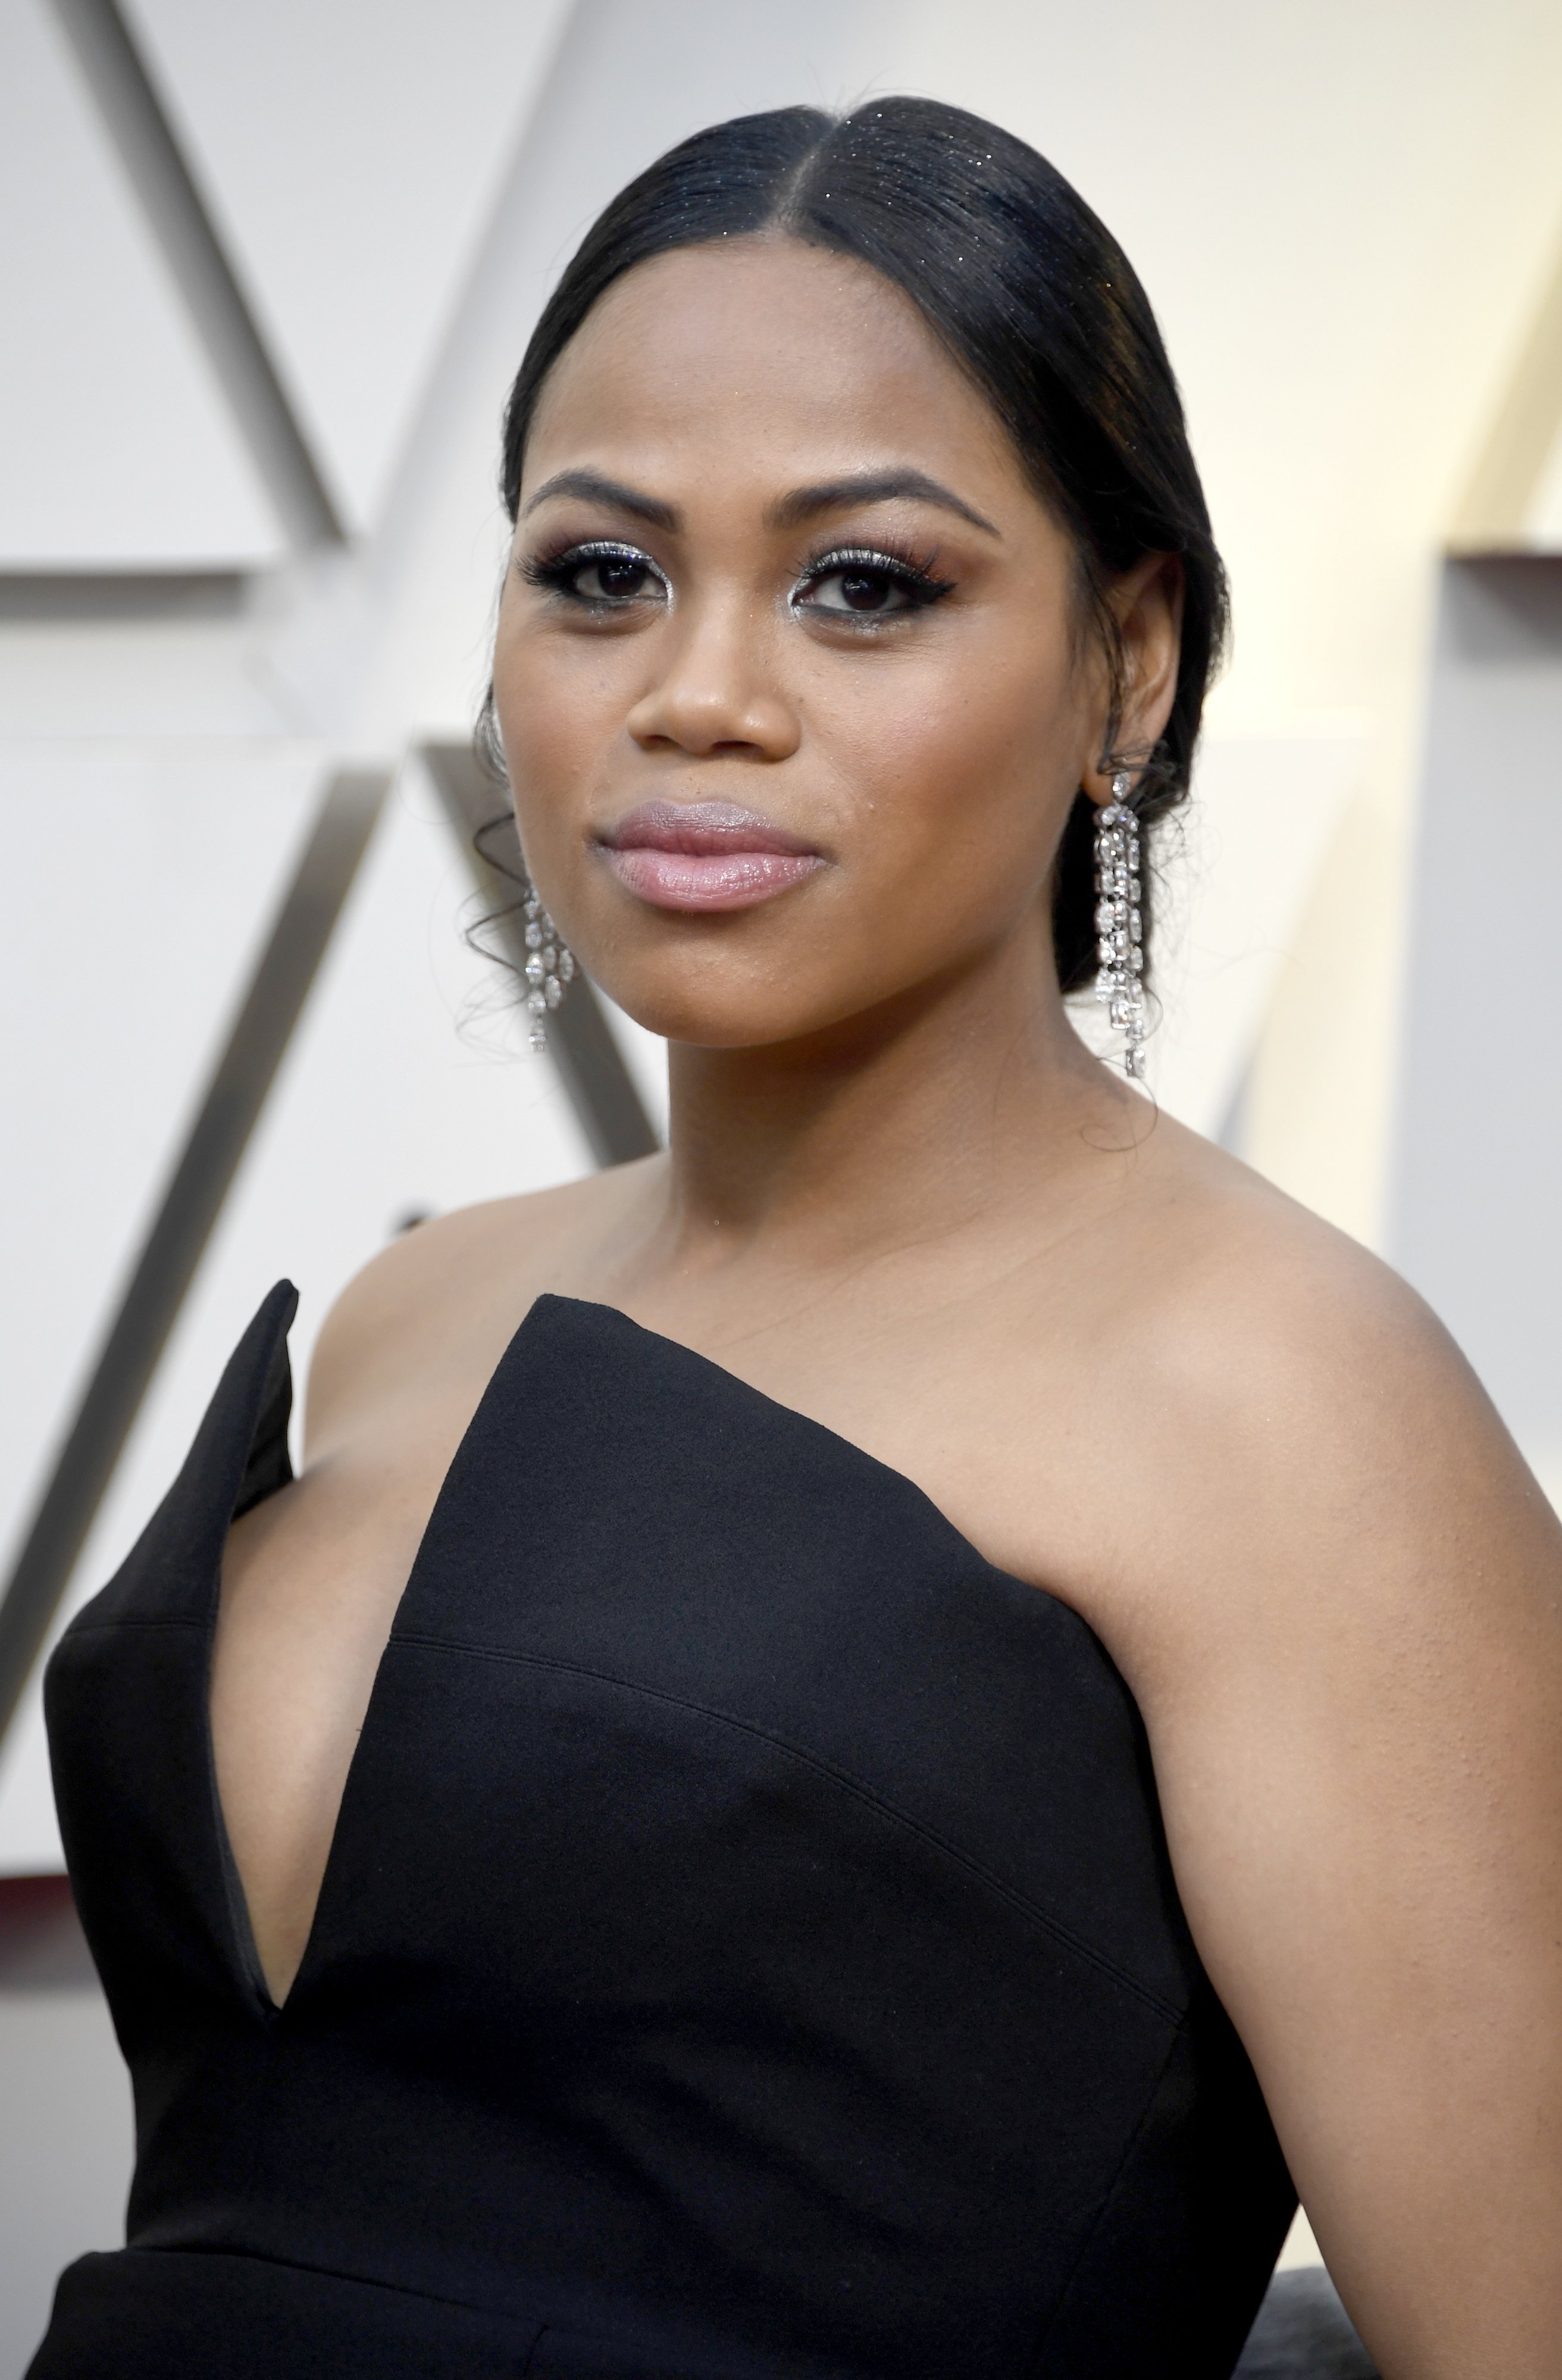 Zinzi Evans attends the 91st Annual Academy Awards at Dolby Theatre on February 24, 2019, in Hollywood, California. | Source: Getty Images